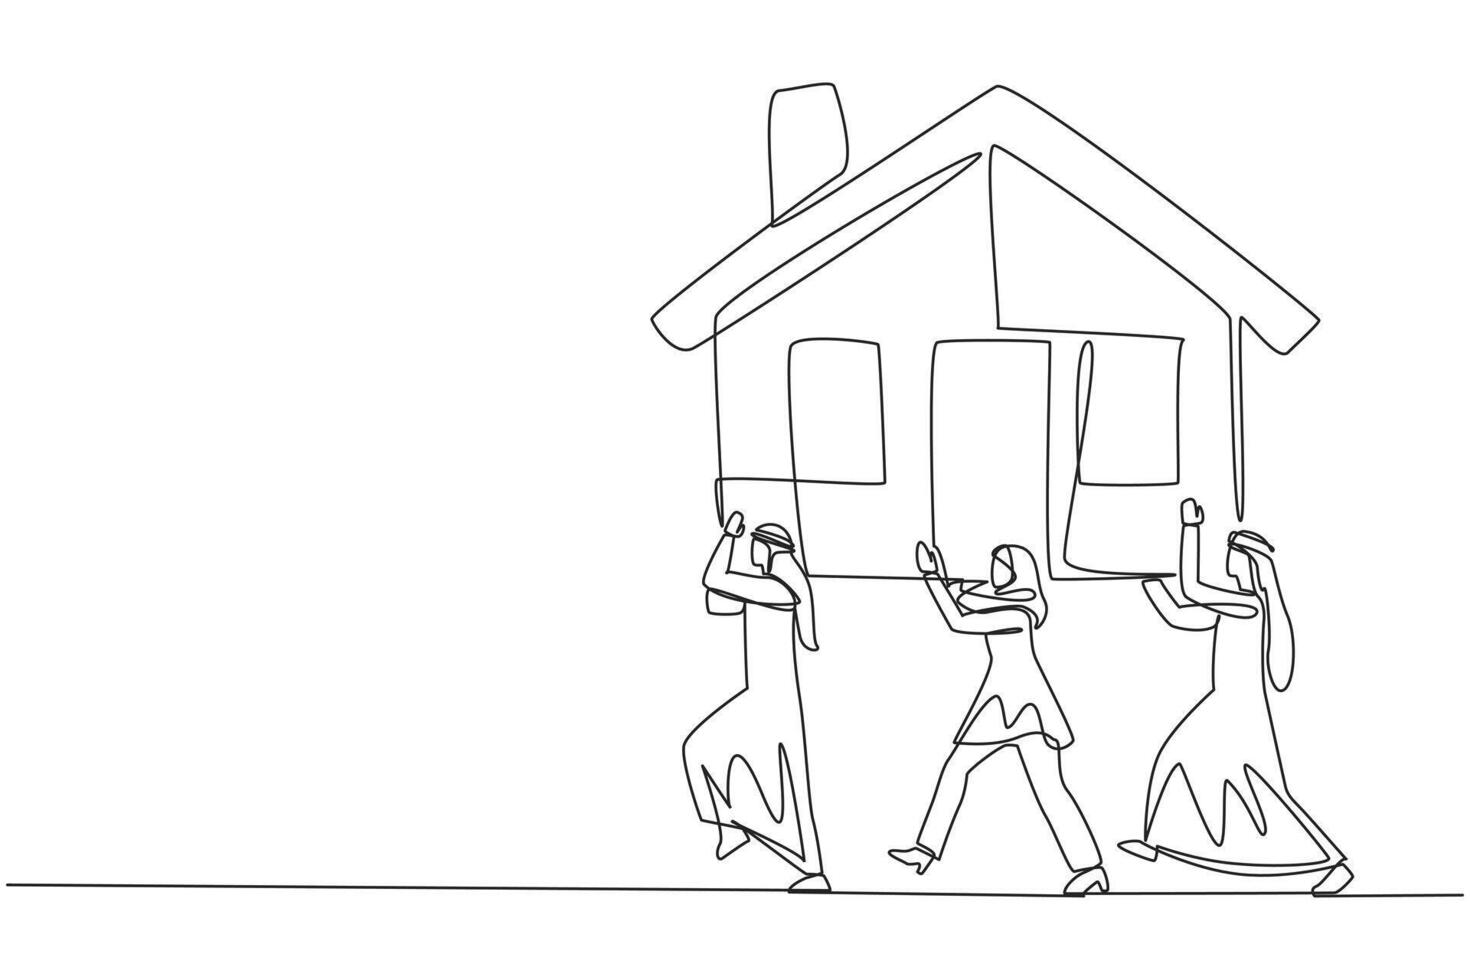 Single one line drawing group of Arab businessmen and Arab businesswomen work together carry miniature house. Profitable property investment in the future. Continuous line design graphic illustration vector